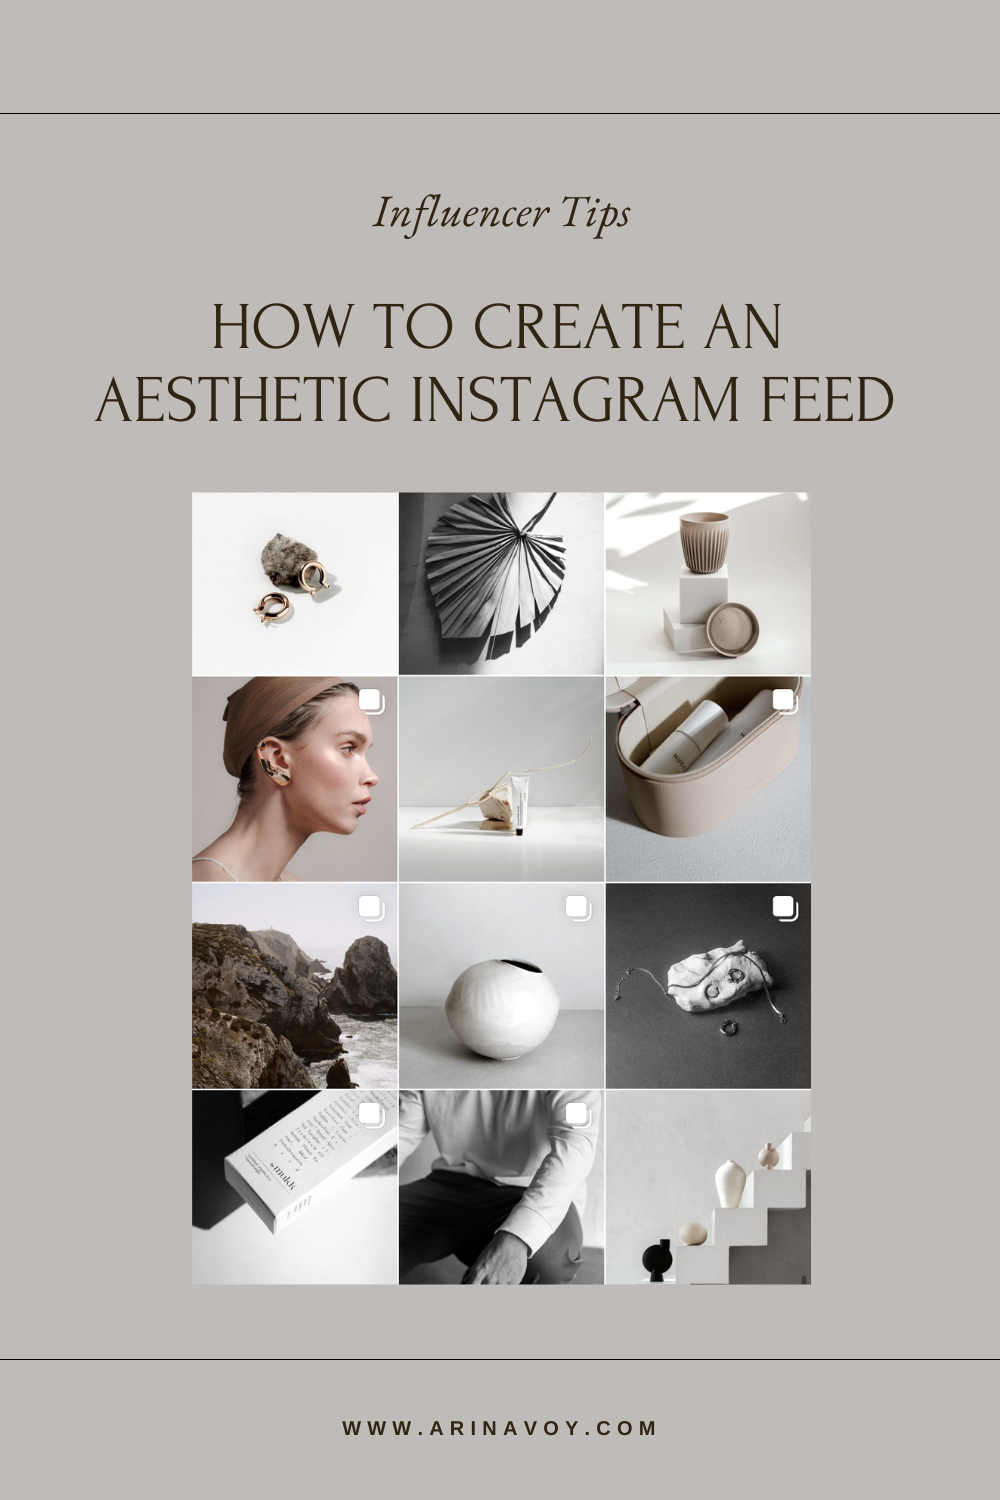 Everything You Need To Achieve The New Instagram Aesthetic